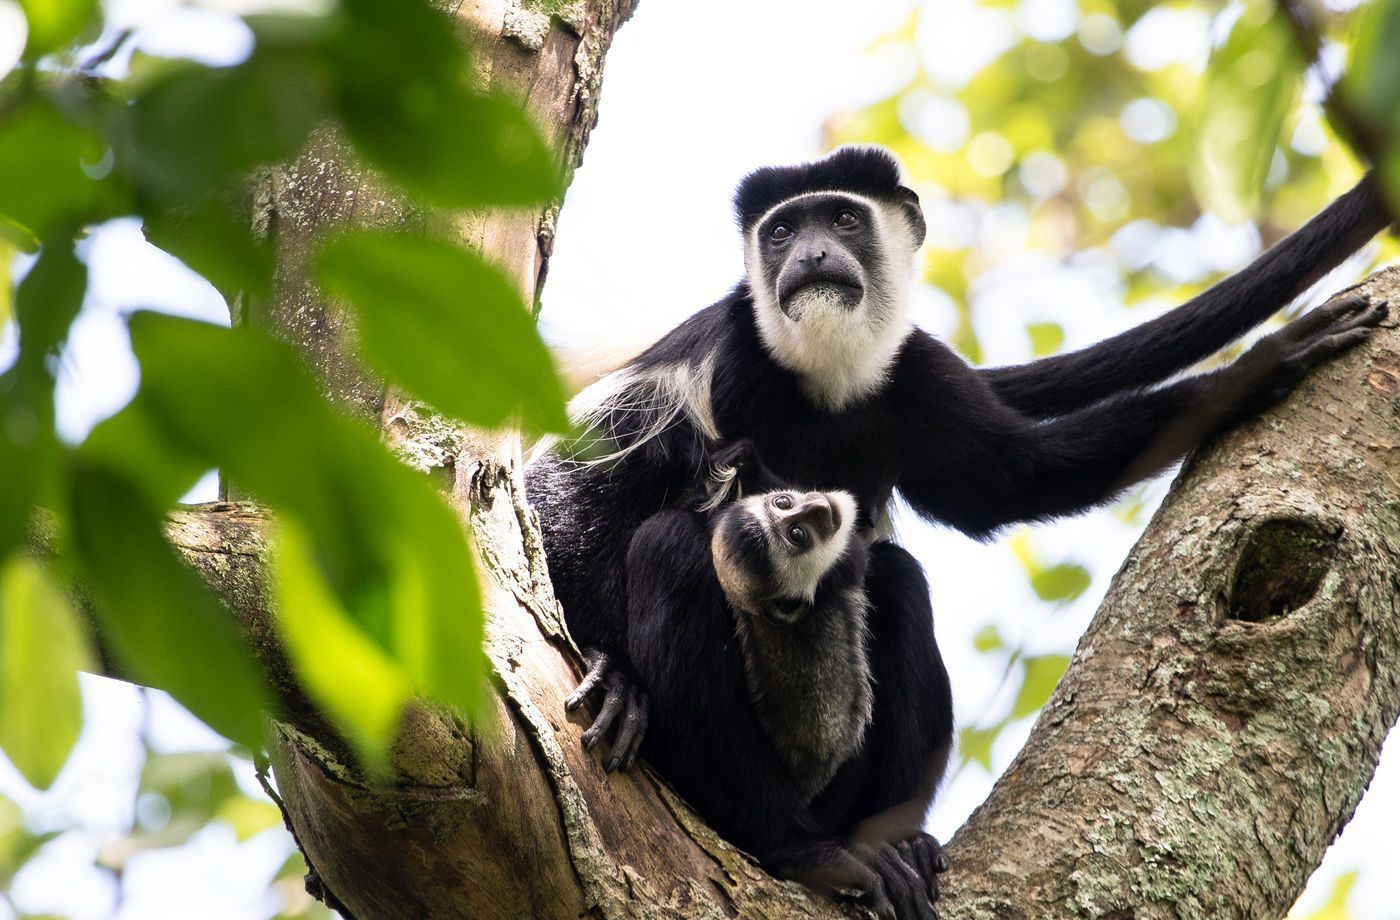 An image of colobus monkeys in a tree